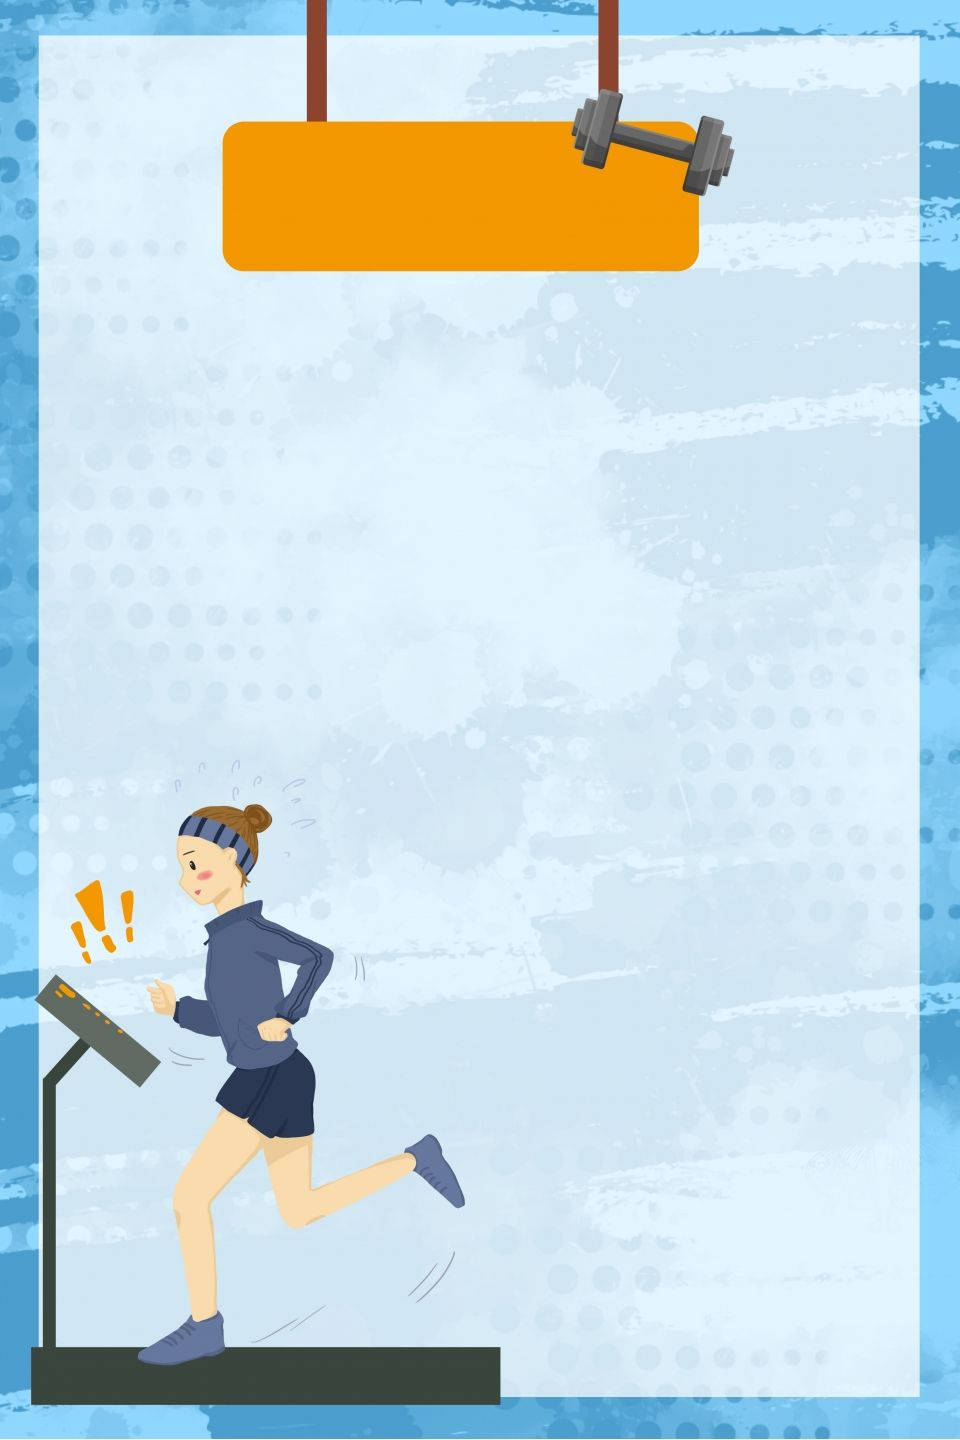 Download Treadmill Exercise Animated Art Wallpaper 